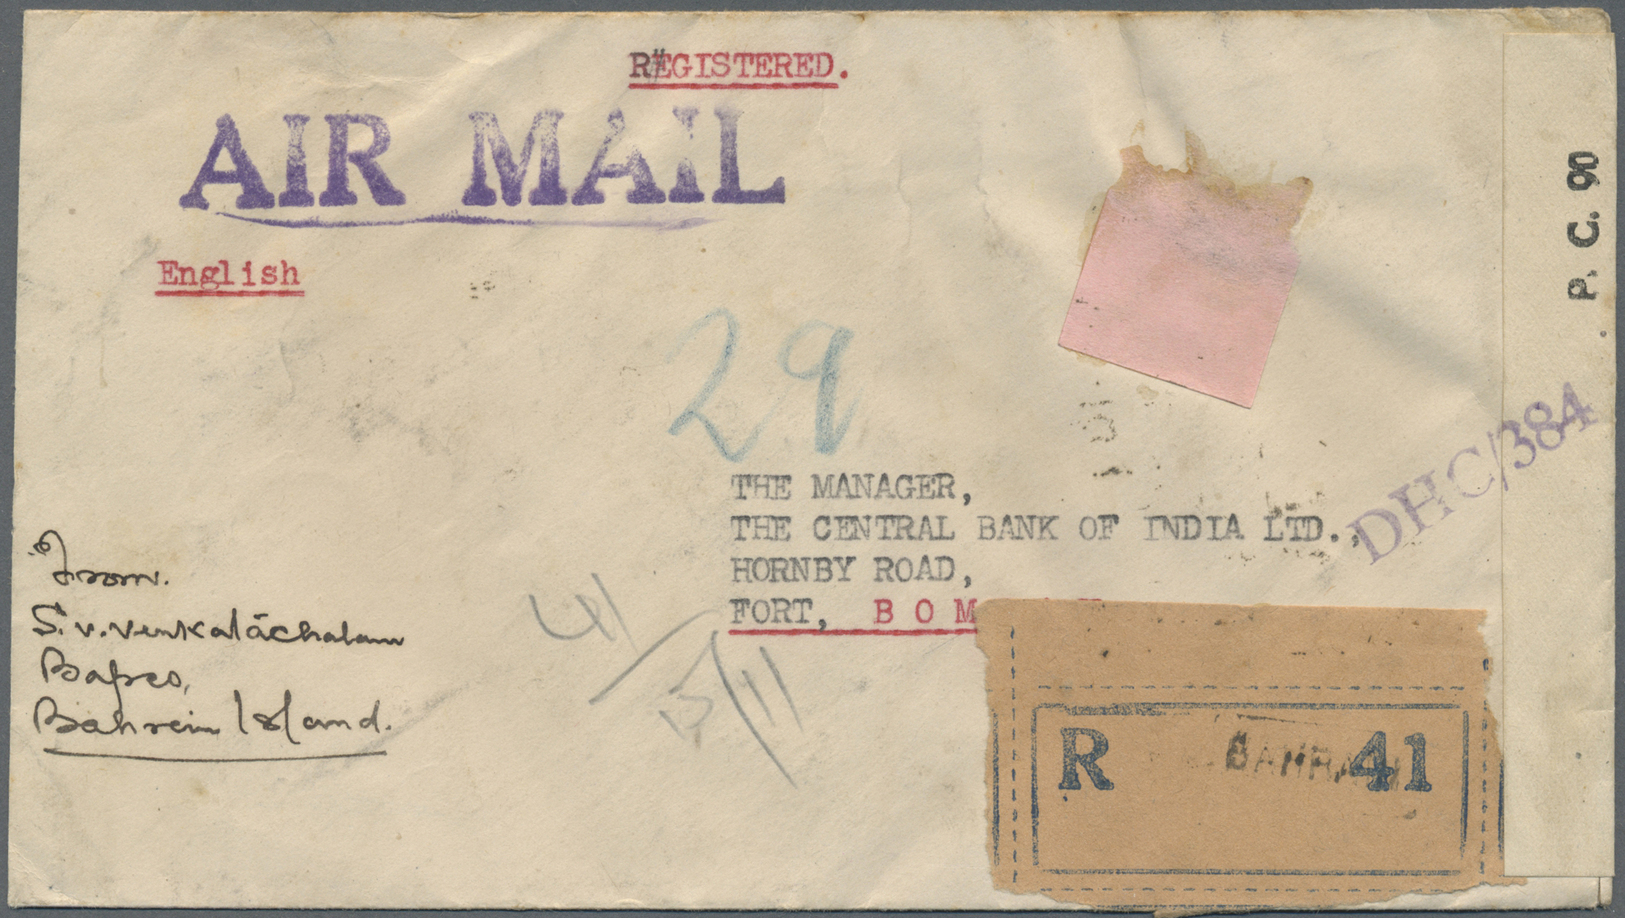 Br Bahrain: 1944. Registered Air Mail Envelope Addressed To India Bearing SG 23, 1a Carmine, SG 38, 3p Grey (2) And SG 3 - Bahrain (1965-...)